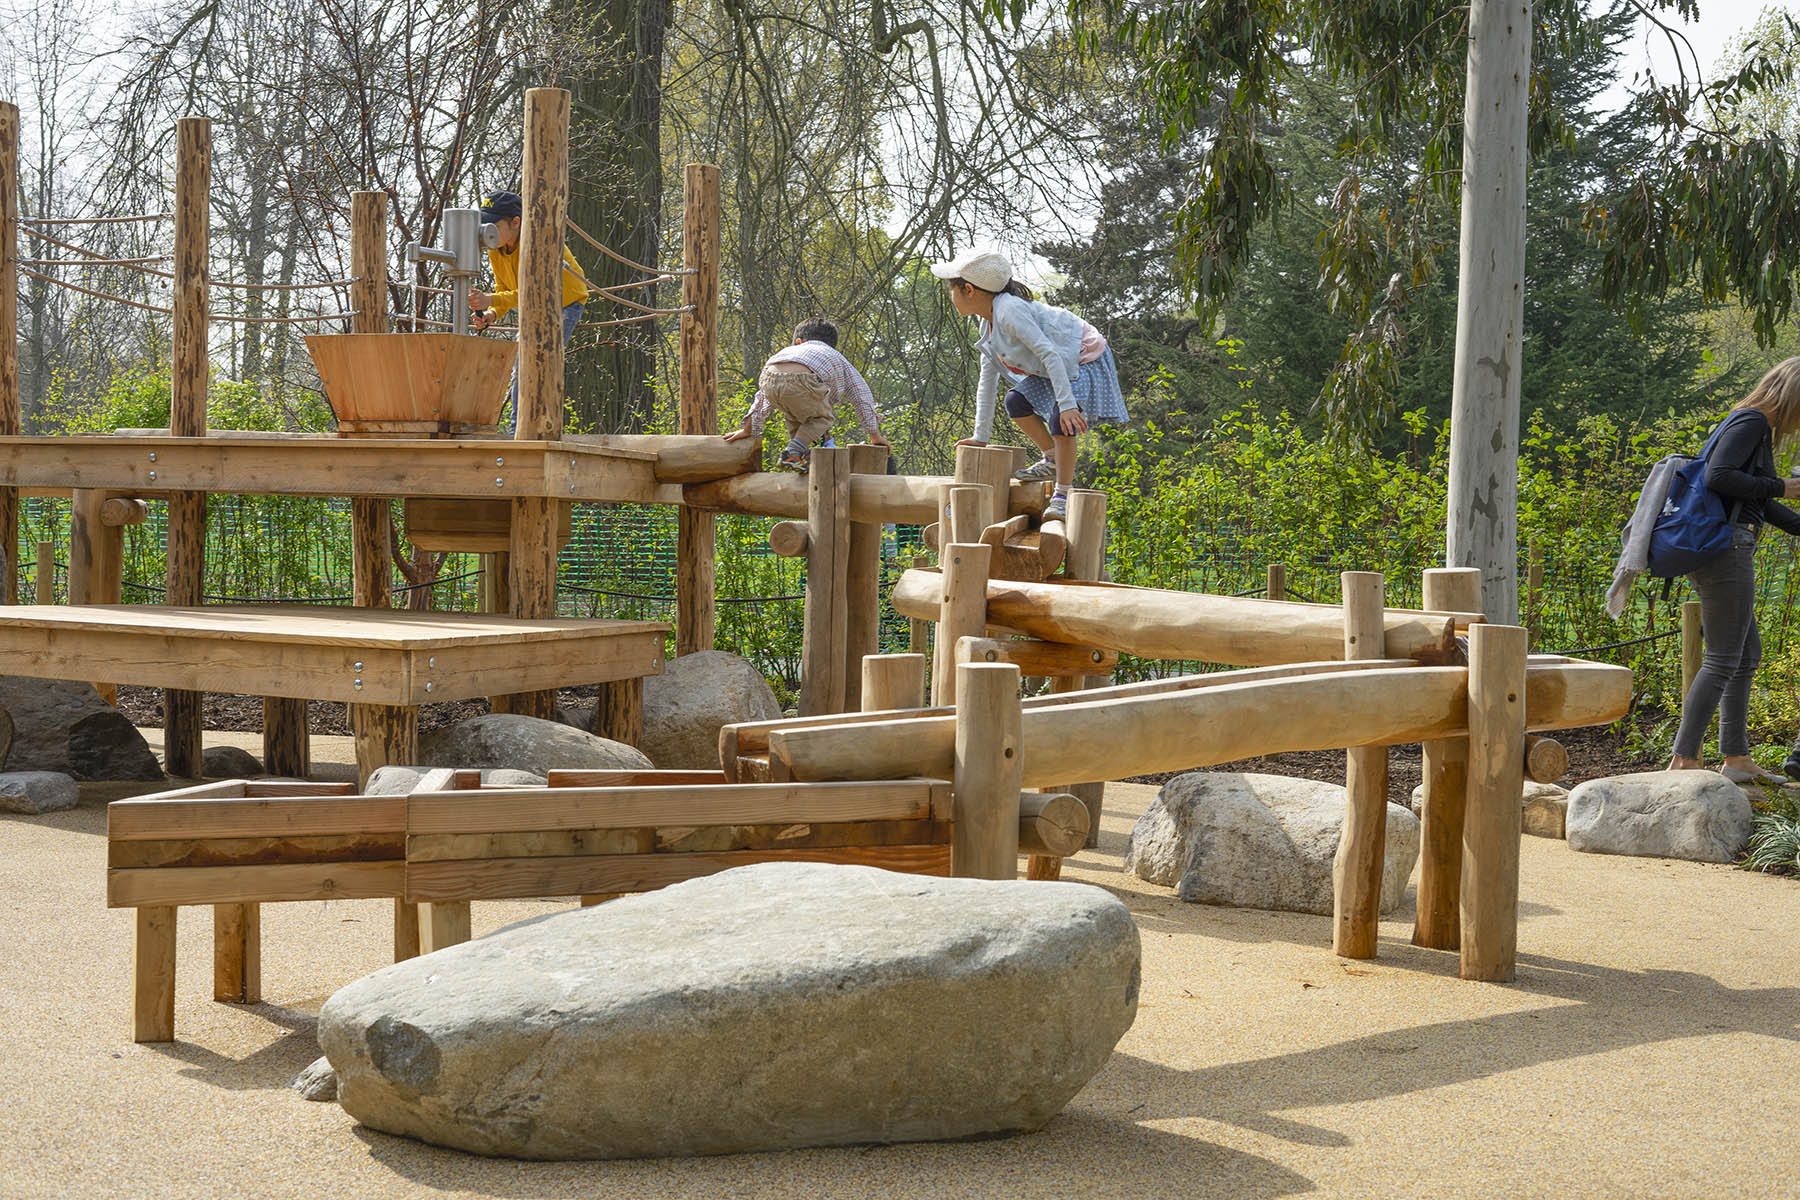 sand and water play equipment log trough